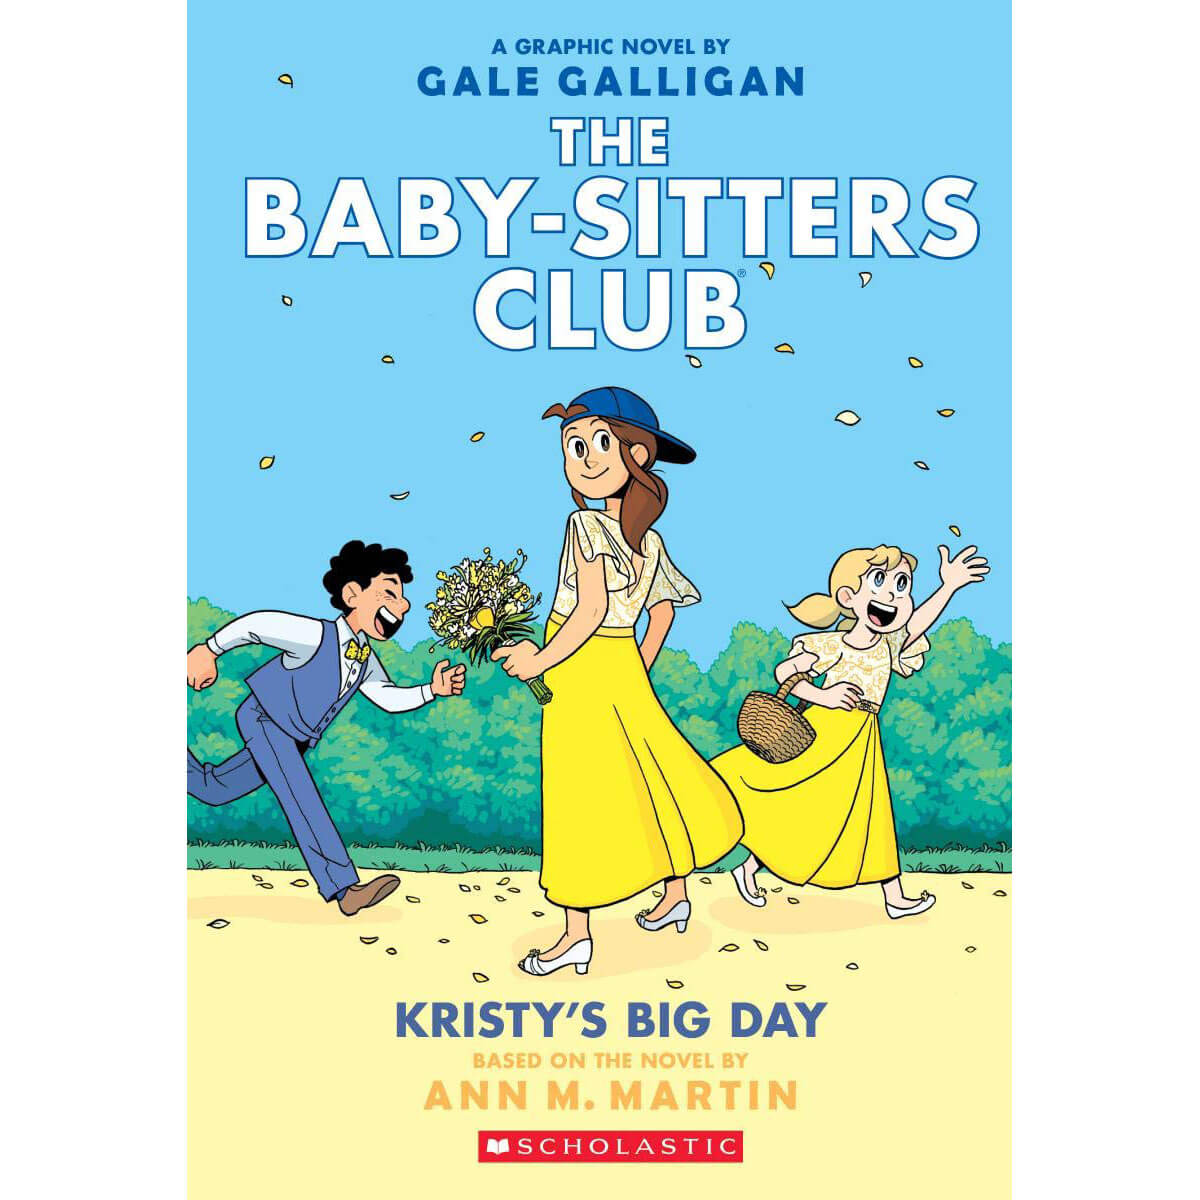 Kristy's Big Day (The Baby-Sitters Club Graphic Novel #6)